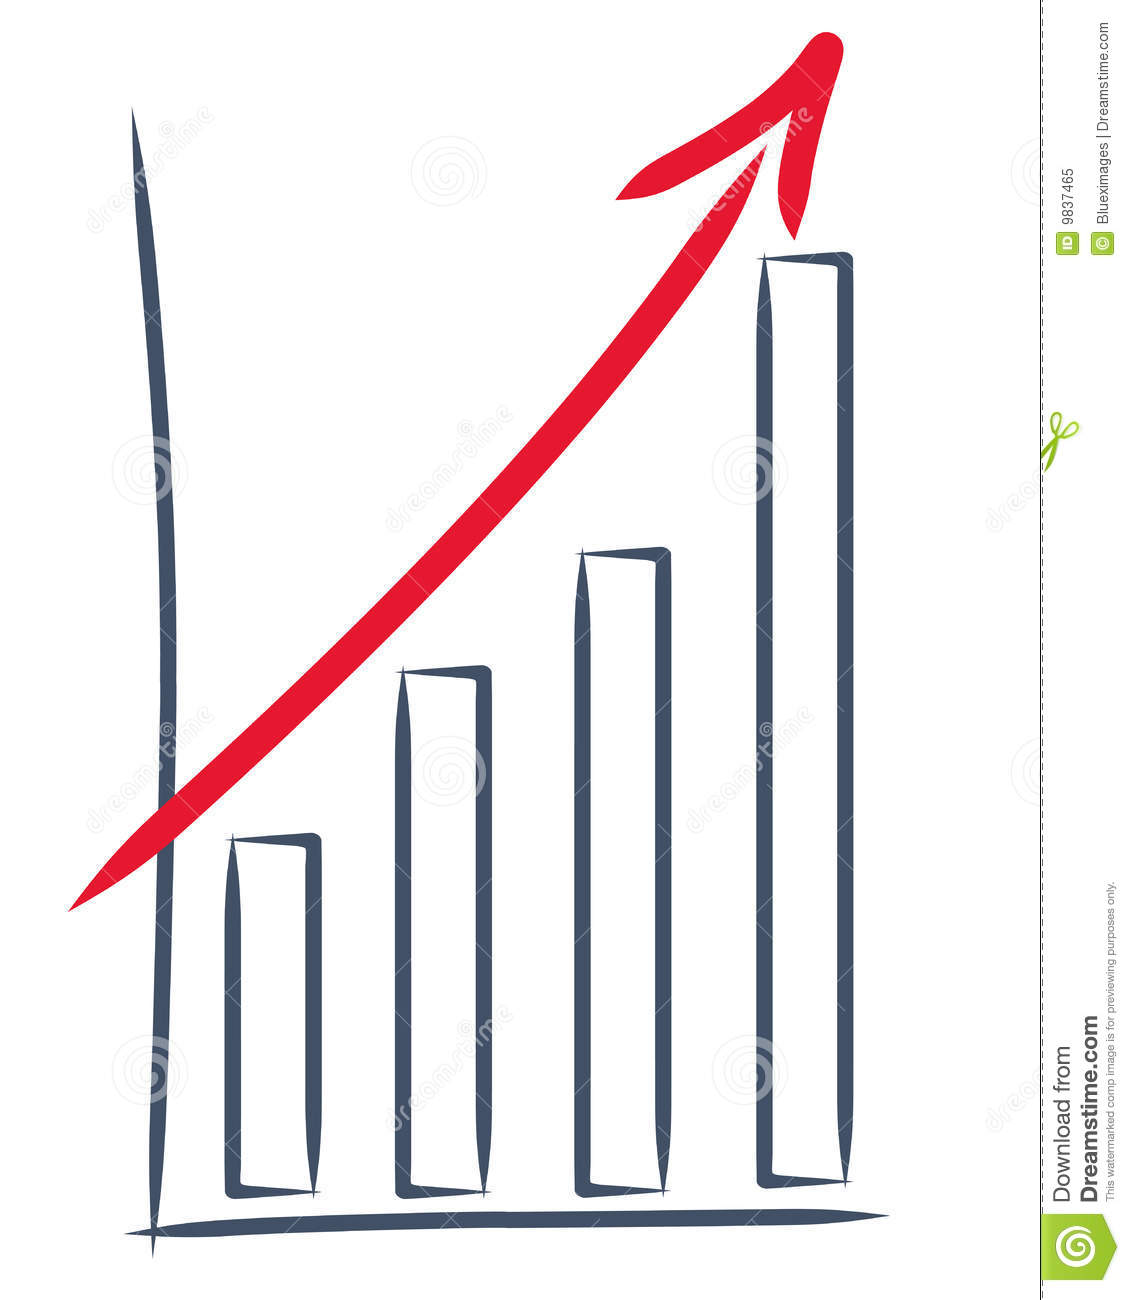 Drawing Of A Sales Increase And Upward Trend